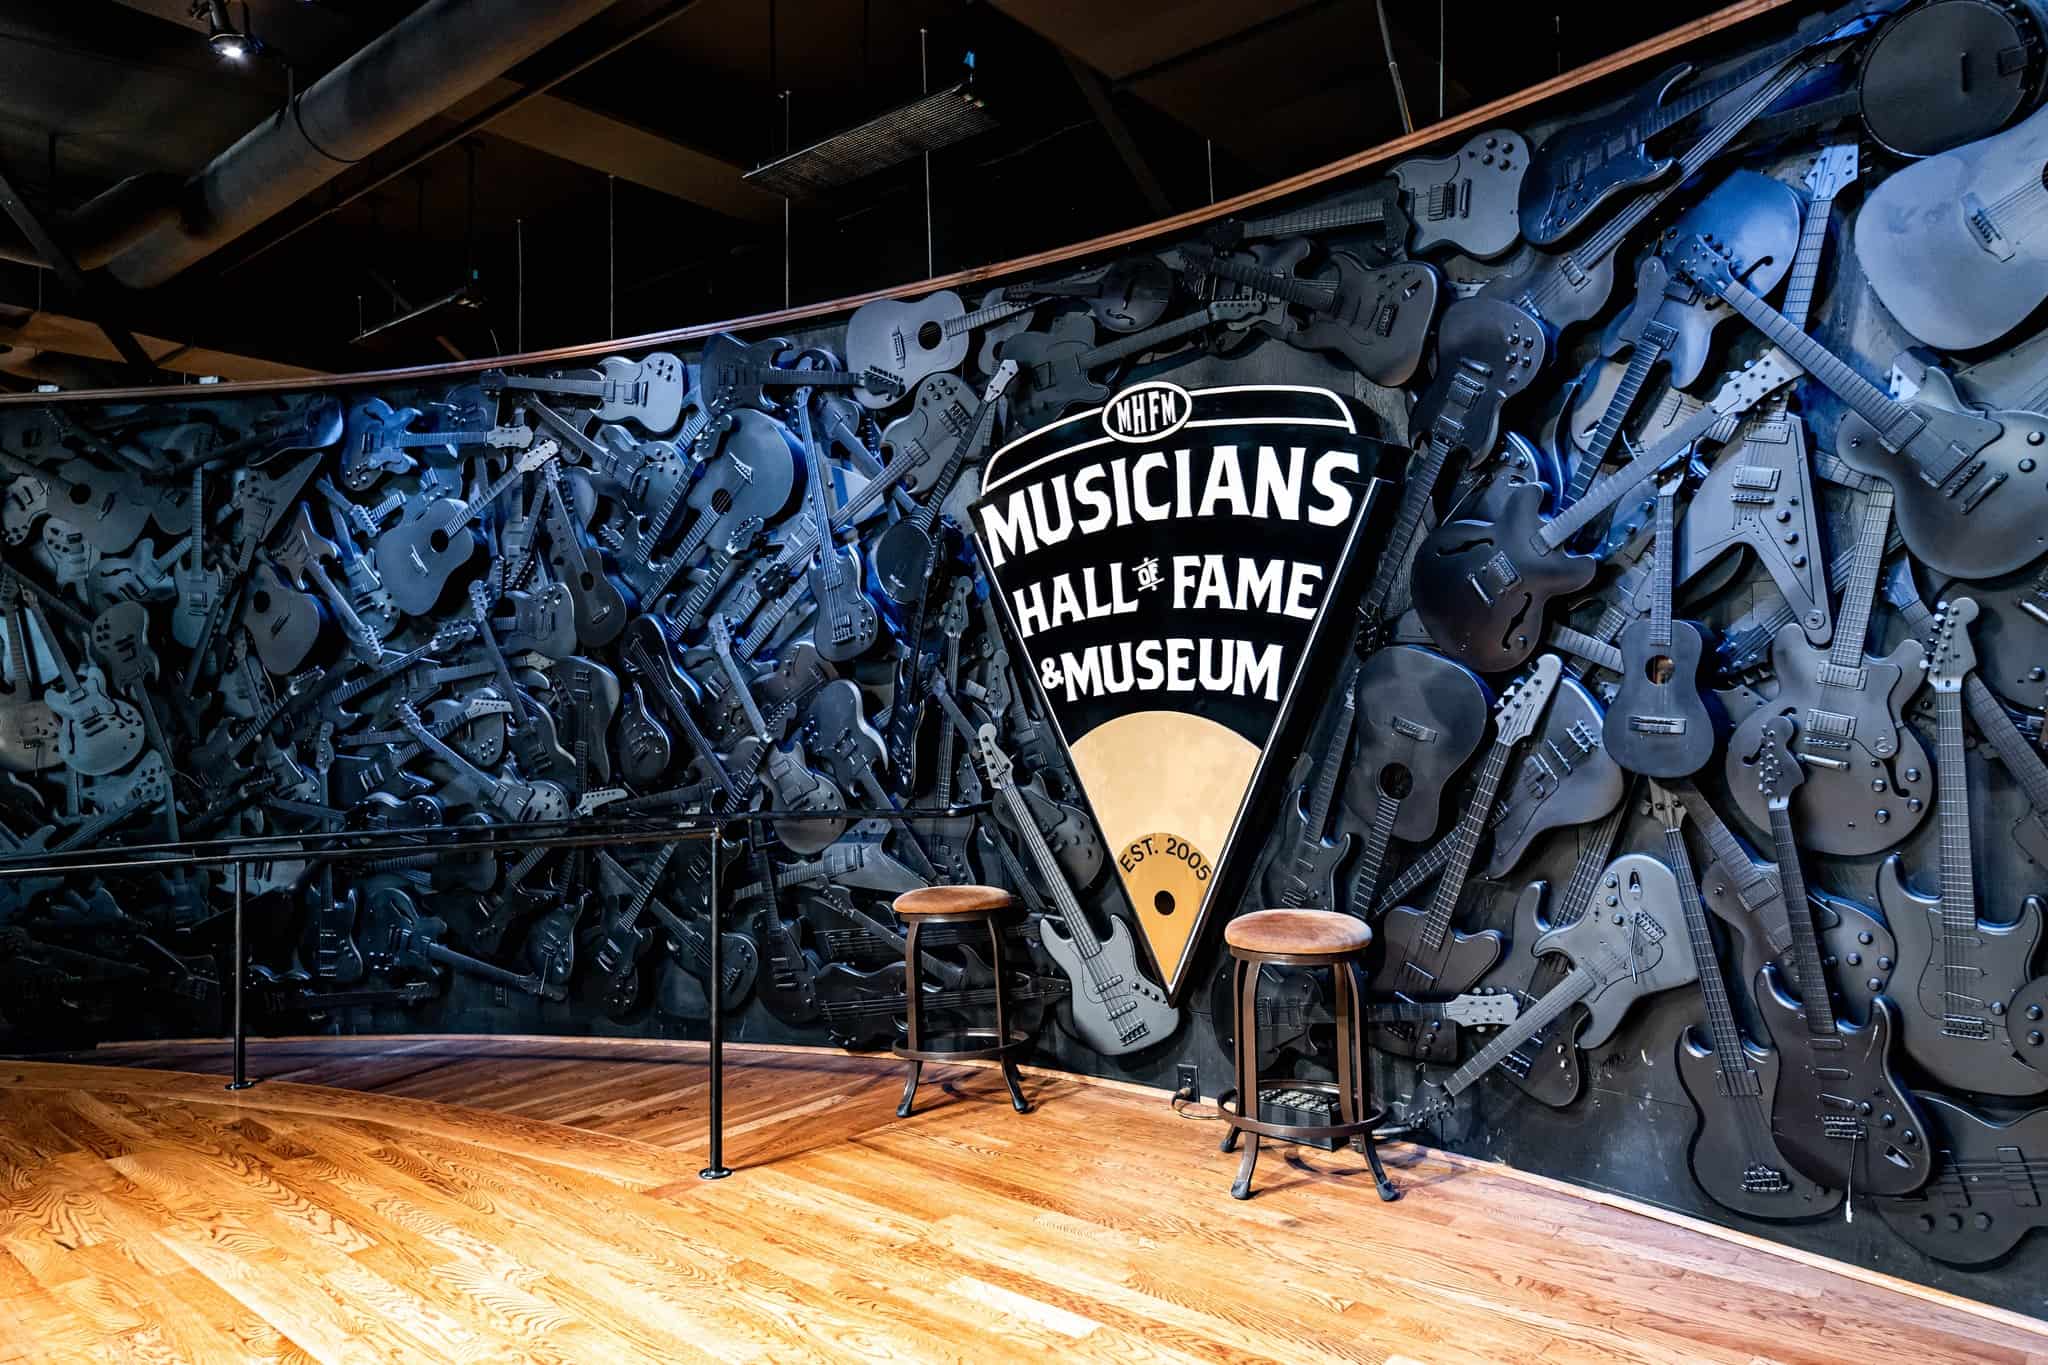 The Musicians Hall of Fame and Museum